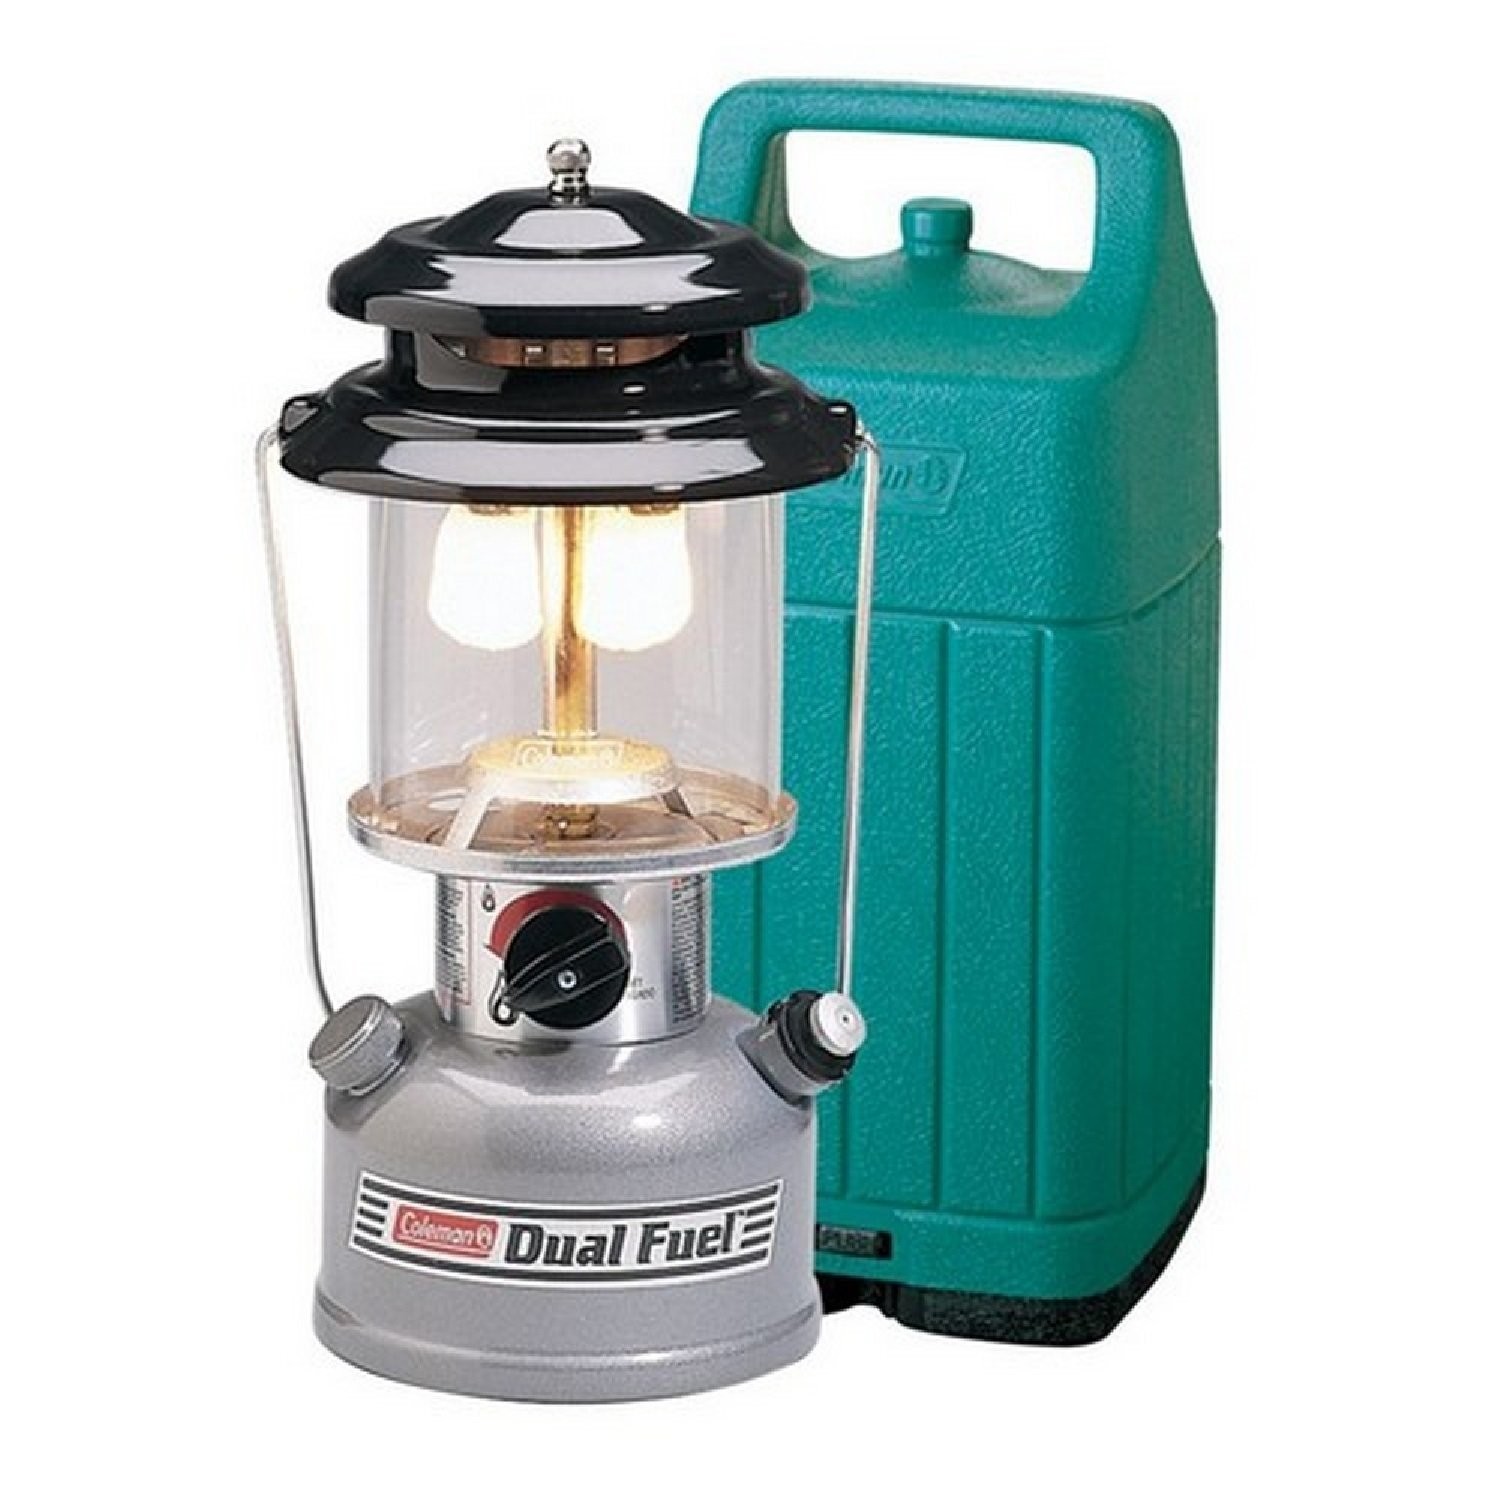 COLEMAN Premium Dual Fuel Lantern with Hard Carrying Case (285)